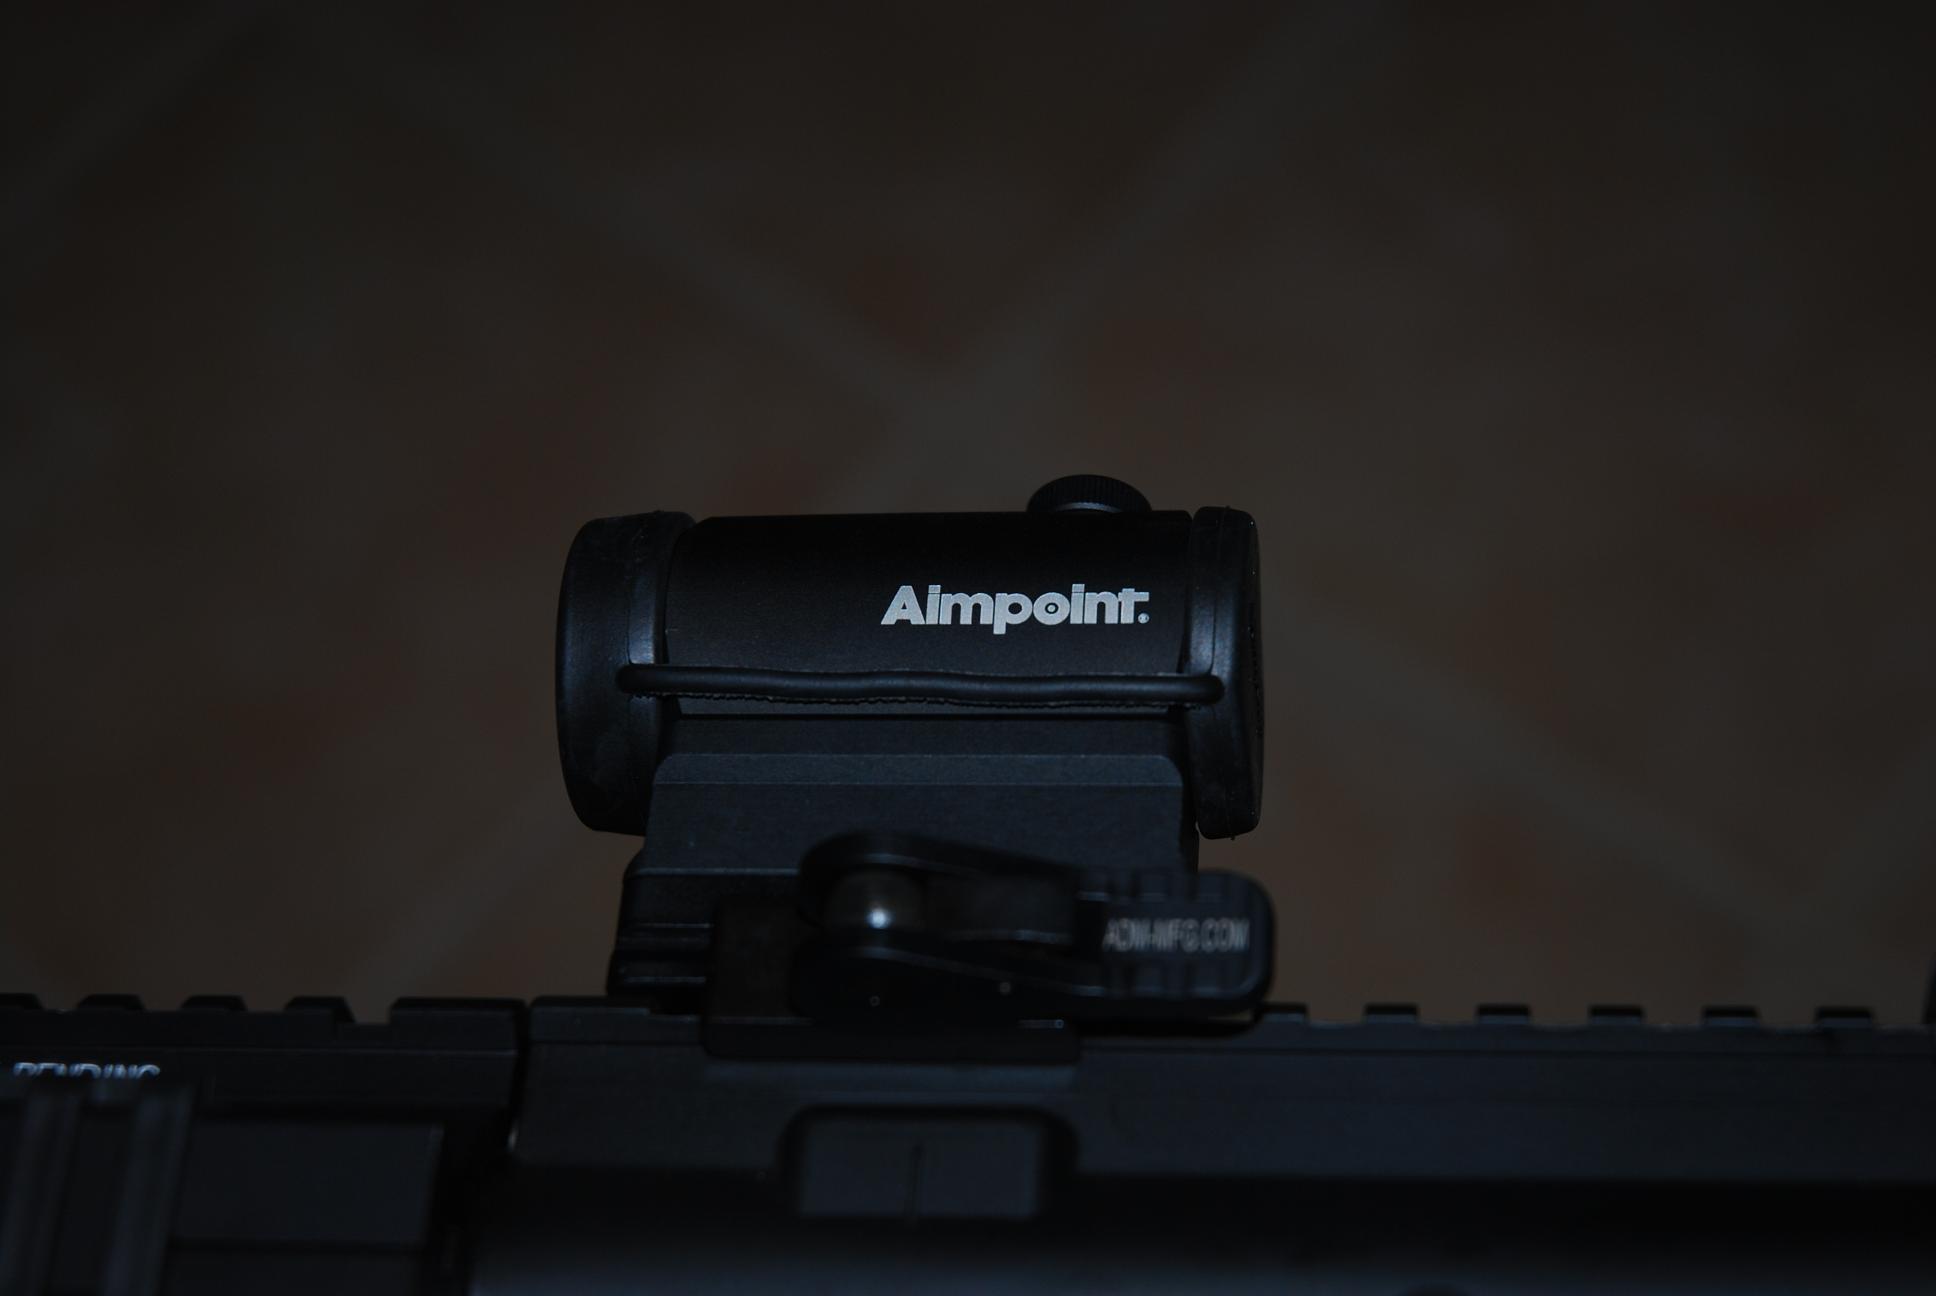 Aimpoint Micro H1, ADM mount on AR-15 || NIKON D80/18-70mm f/3.5-4.5@56 | 1/60s | f4.5 | ISO100 || 2010-08-29 23:59:38